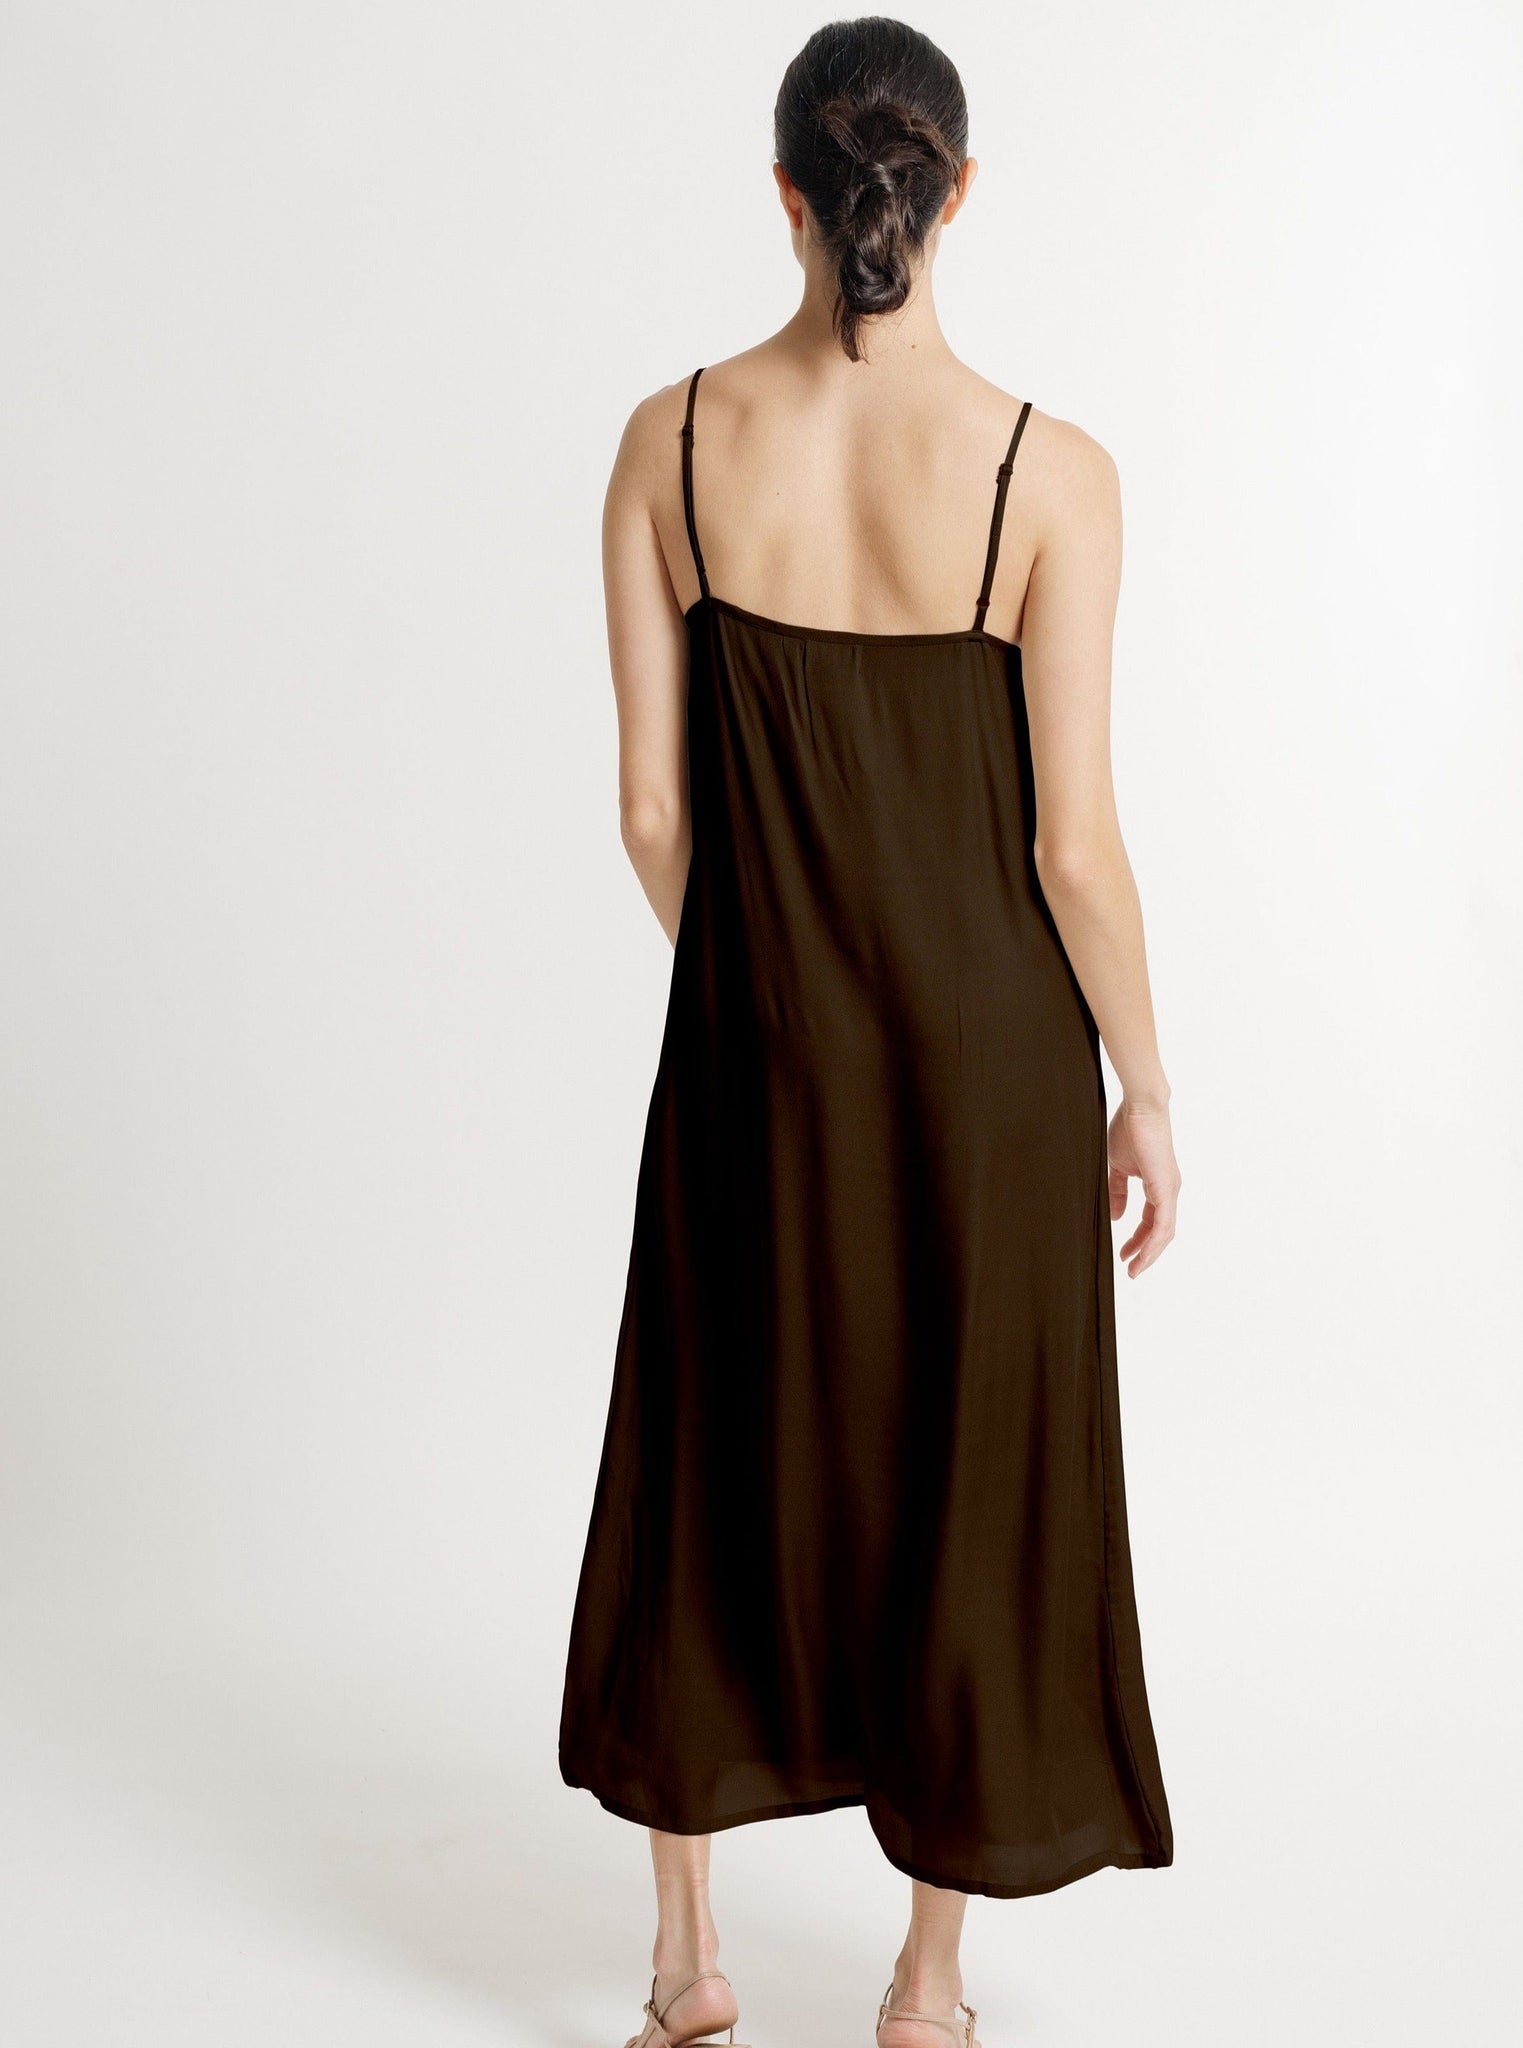 The back view of a woman wearing the Kate Dress - Basalt Brown, a sustainably made brown slip dress handmade in India.